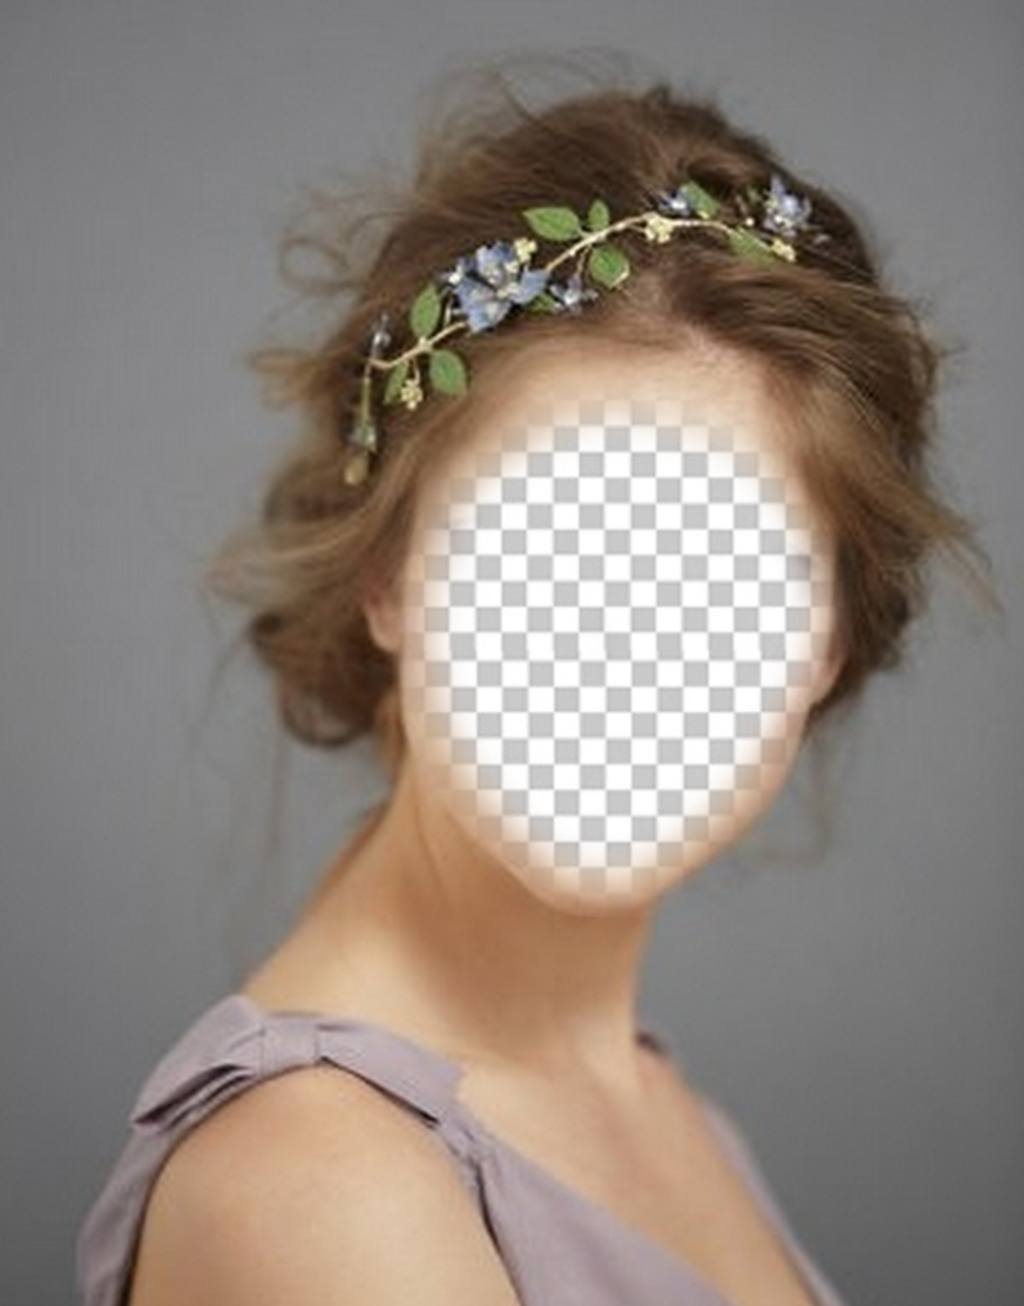 Woman Hairstyles - Apps on Google Play